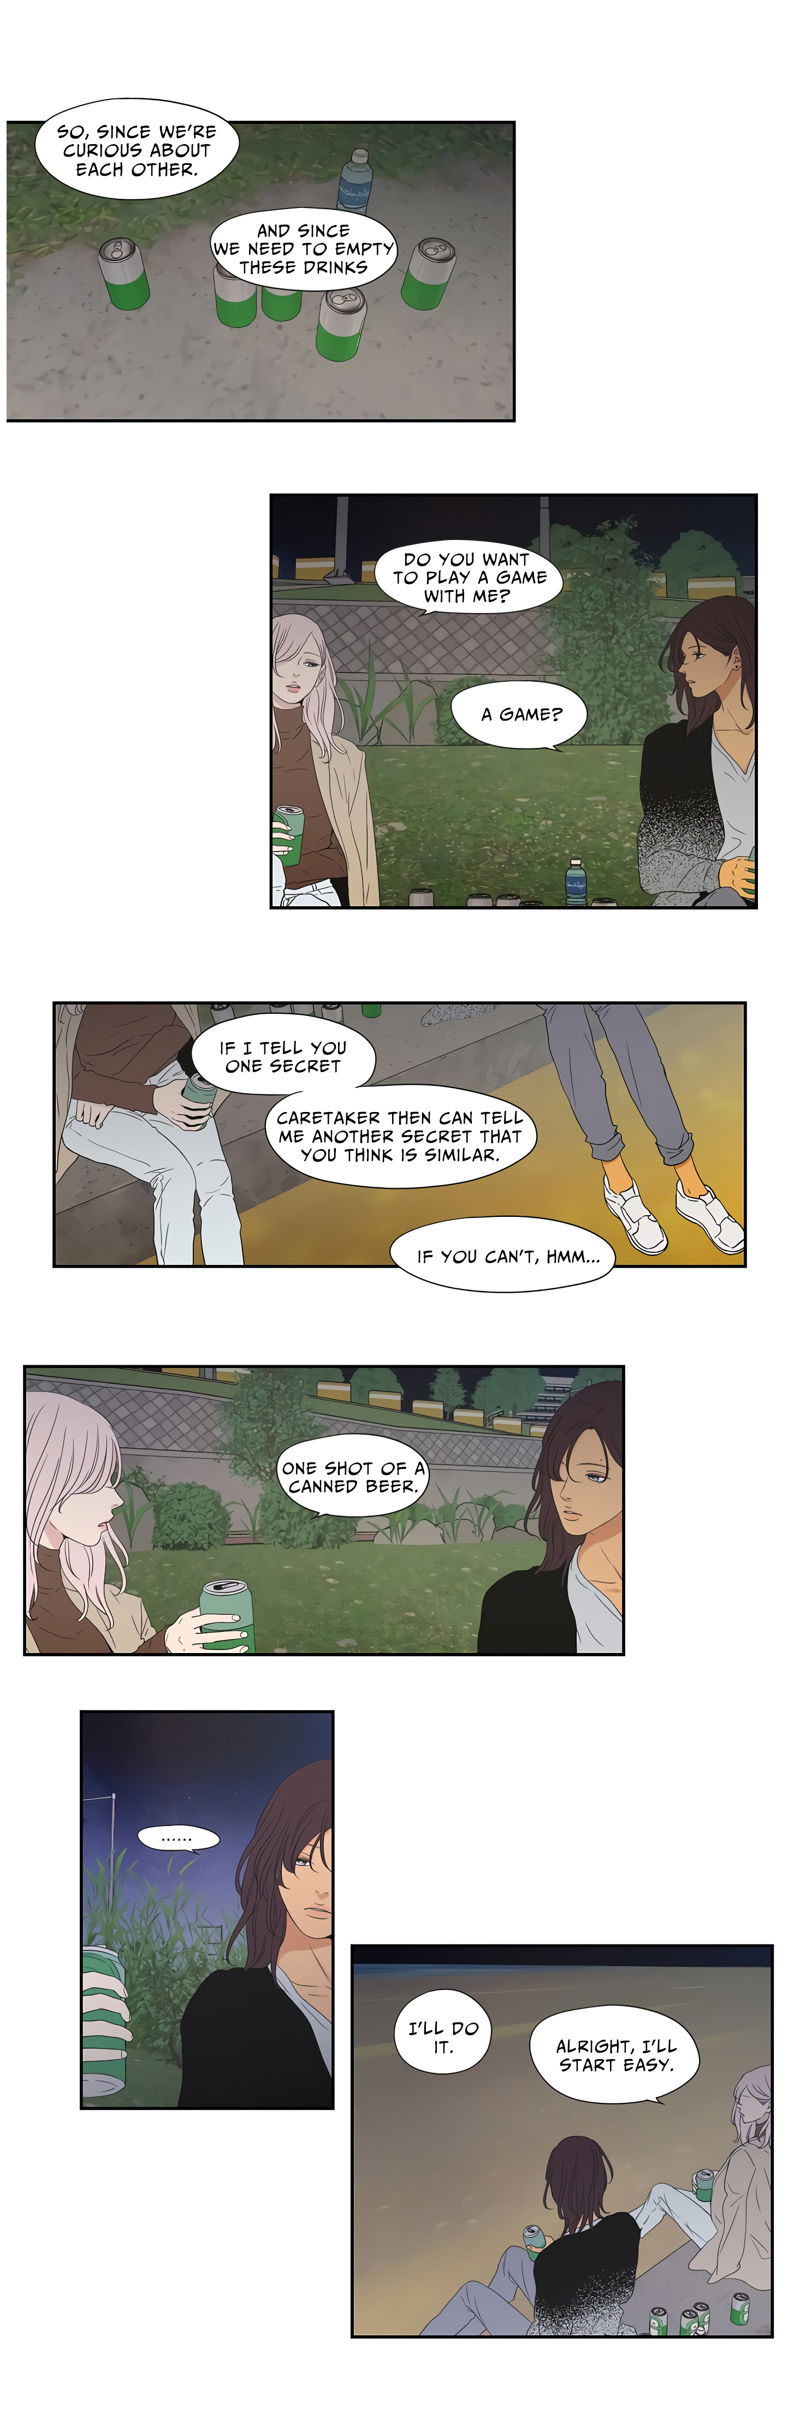 What Does The Fox Say? Chapter 116 Side Story 2 One (8) page 7